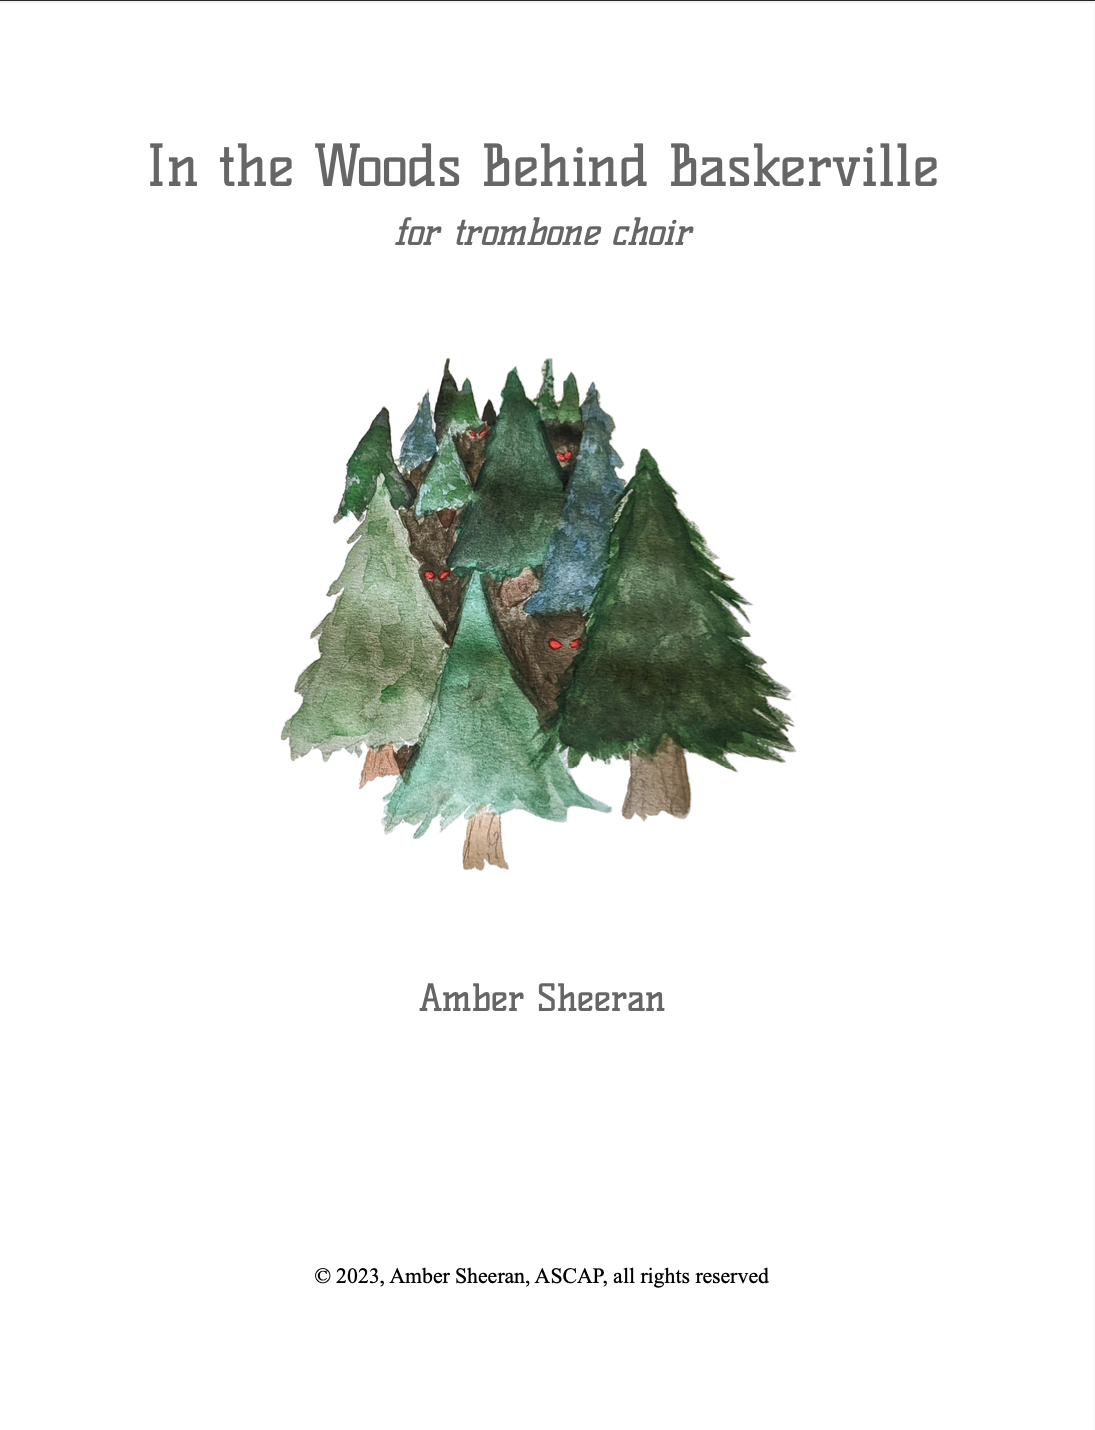 In The Woods Behind Baskerville by Amber Sheeran